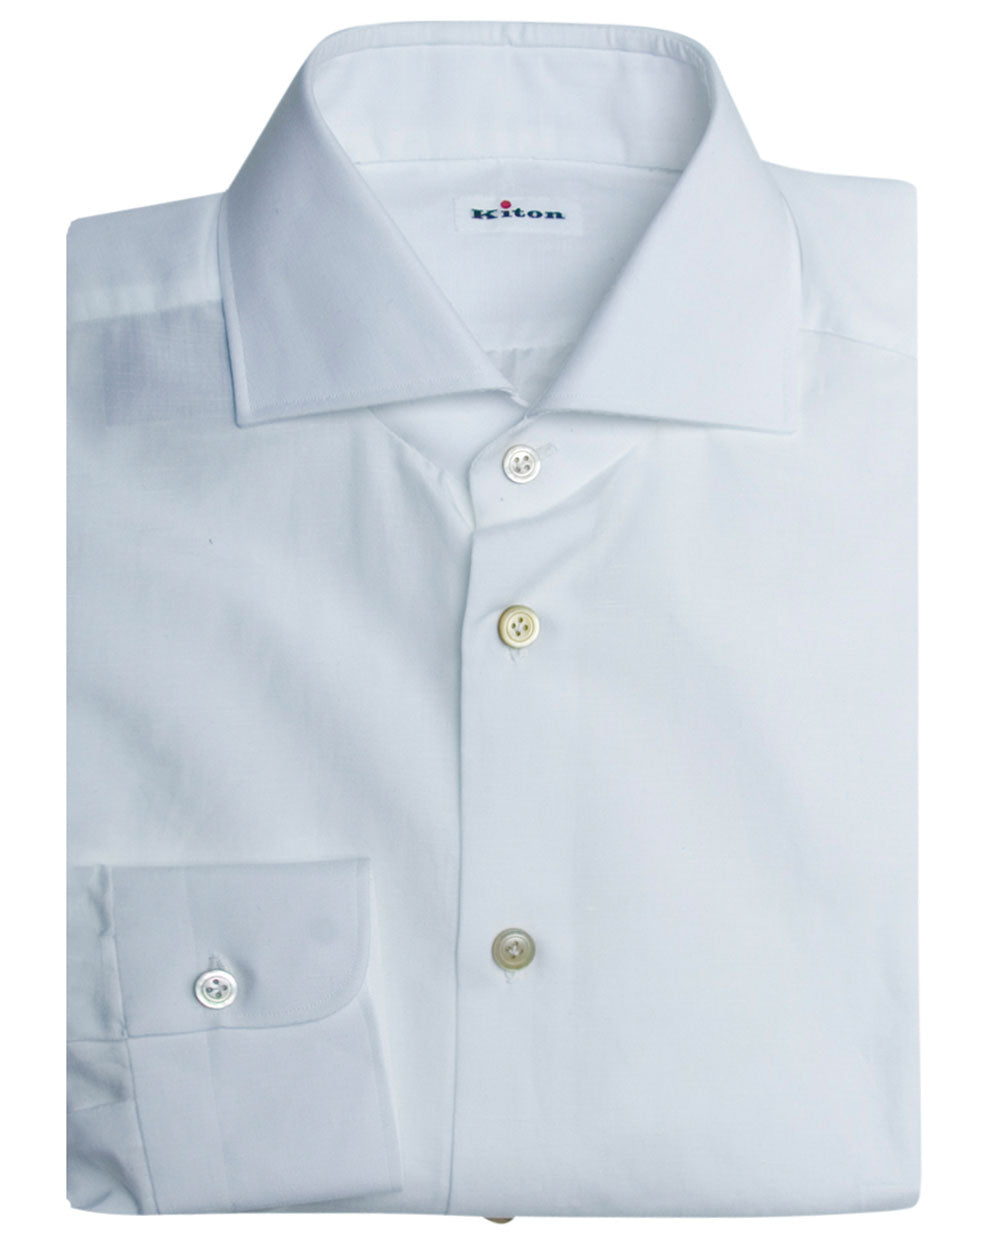 White Cotton and Linen Solid Dress Shirt